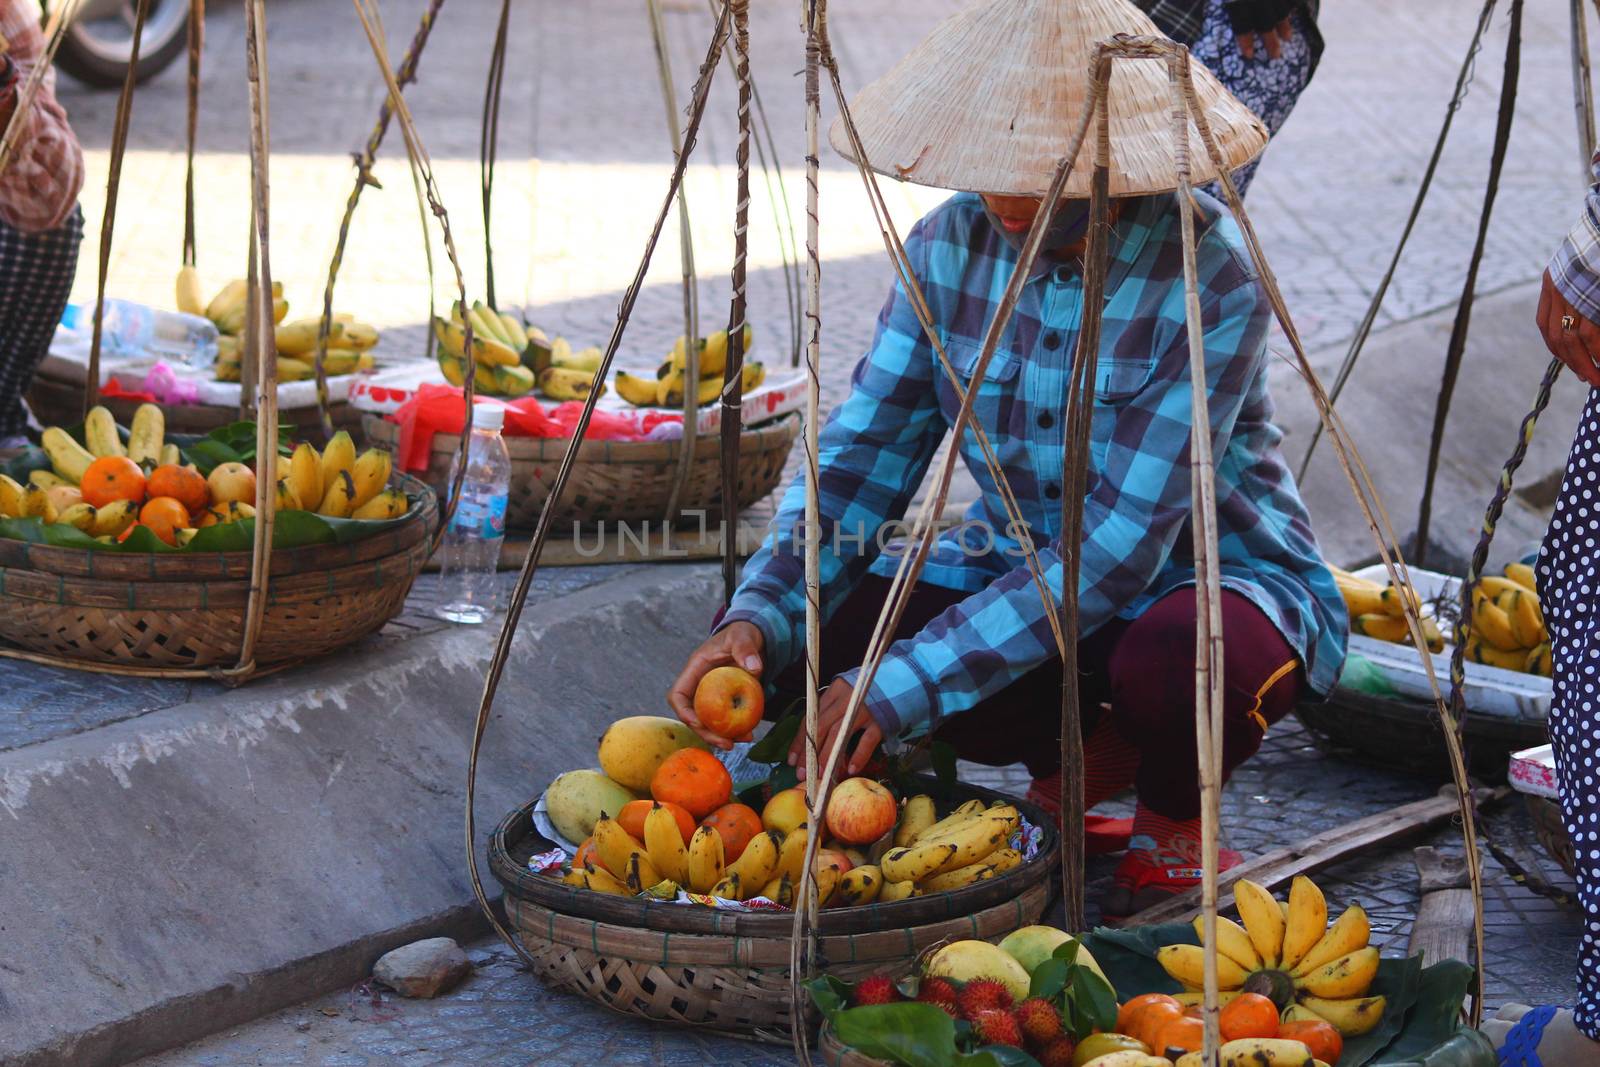 Editorial. Vietnamese street vendors selling fruits using a carrying pole in the ancient town of Hoi an, Vietnam